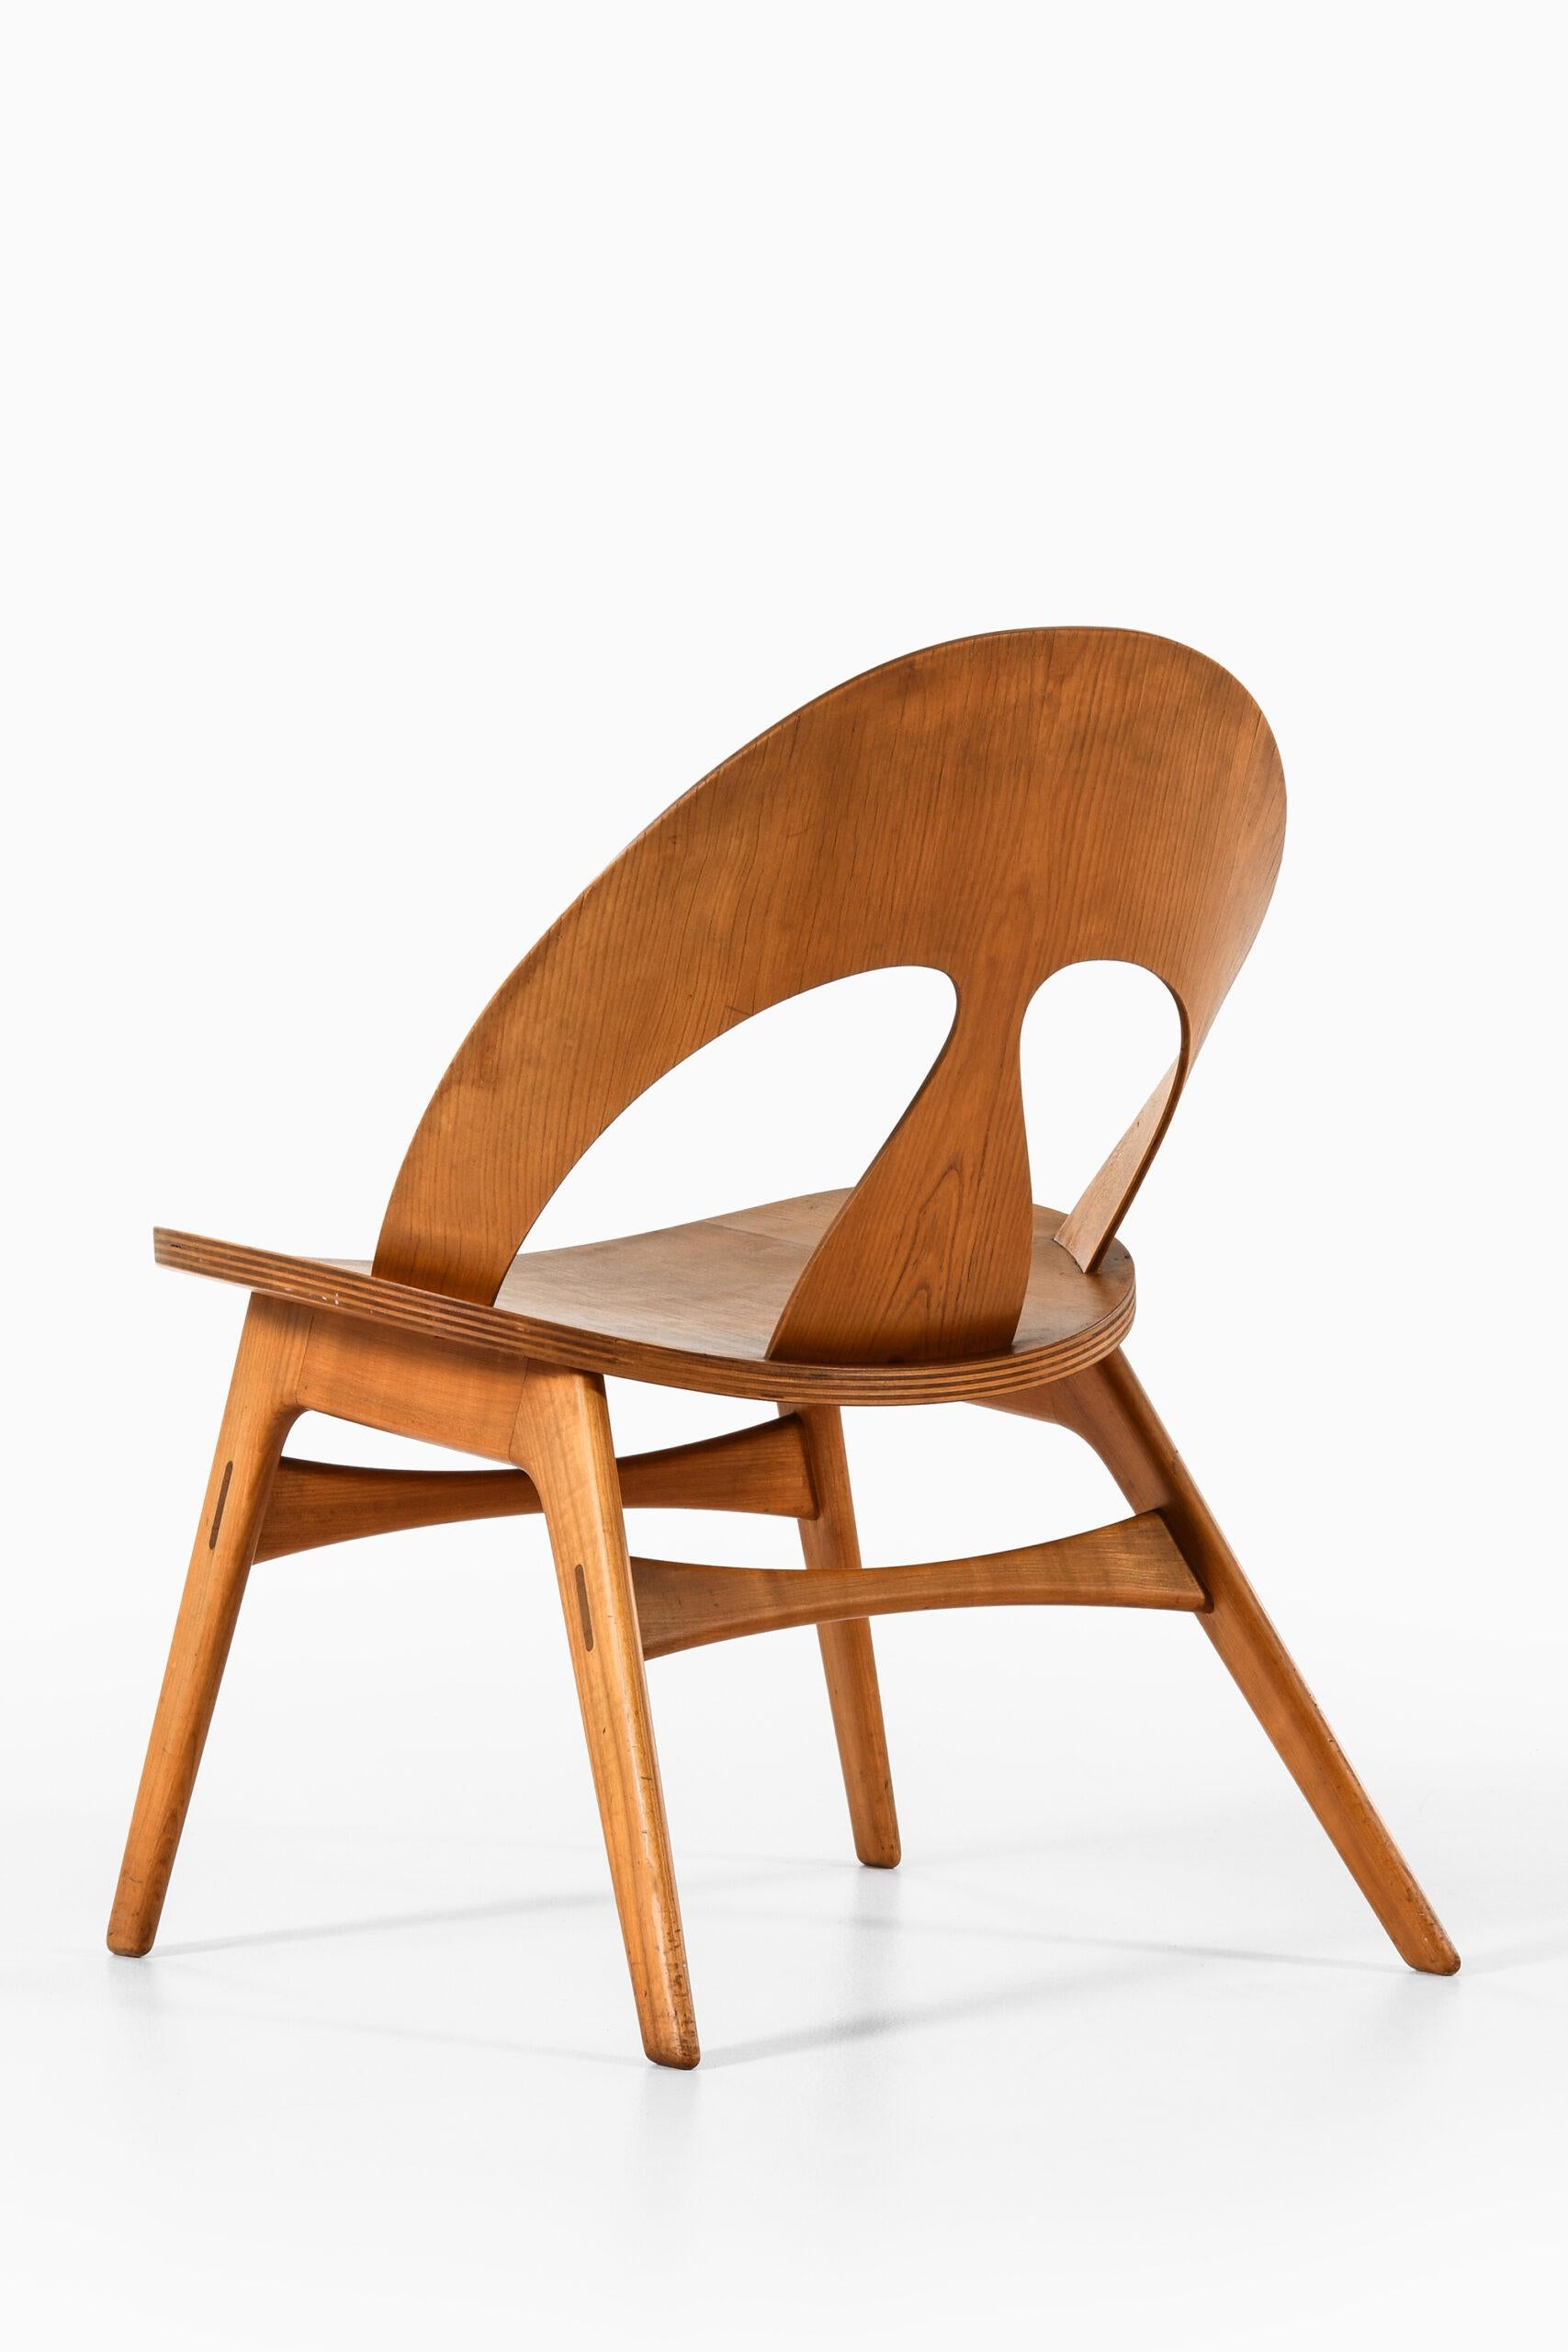 Mid-20th Century Børge Mogensen Easy Chair Produced by Cabinetmaker Erhard Rasmussen For Sale